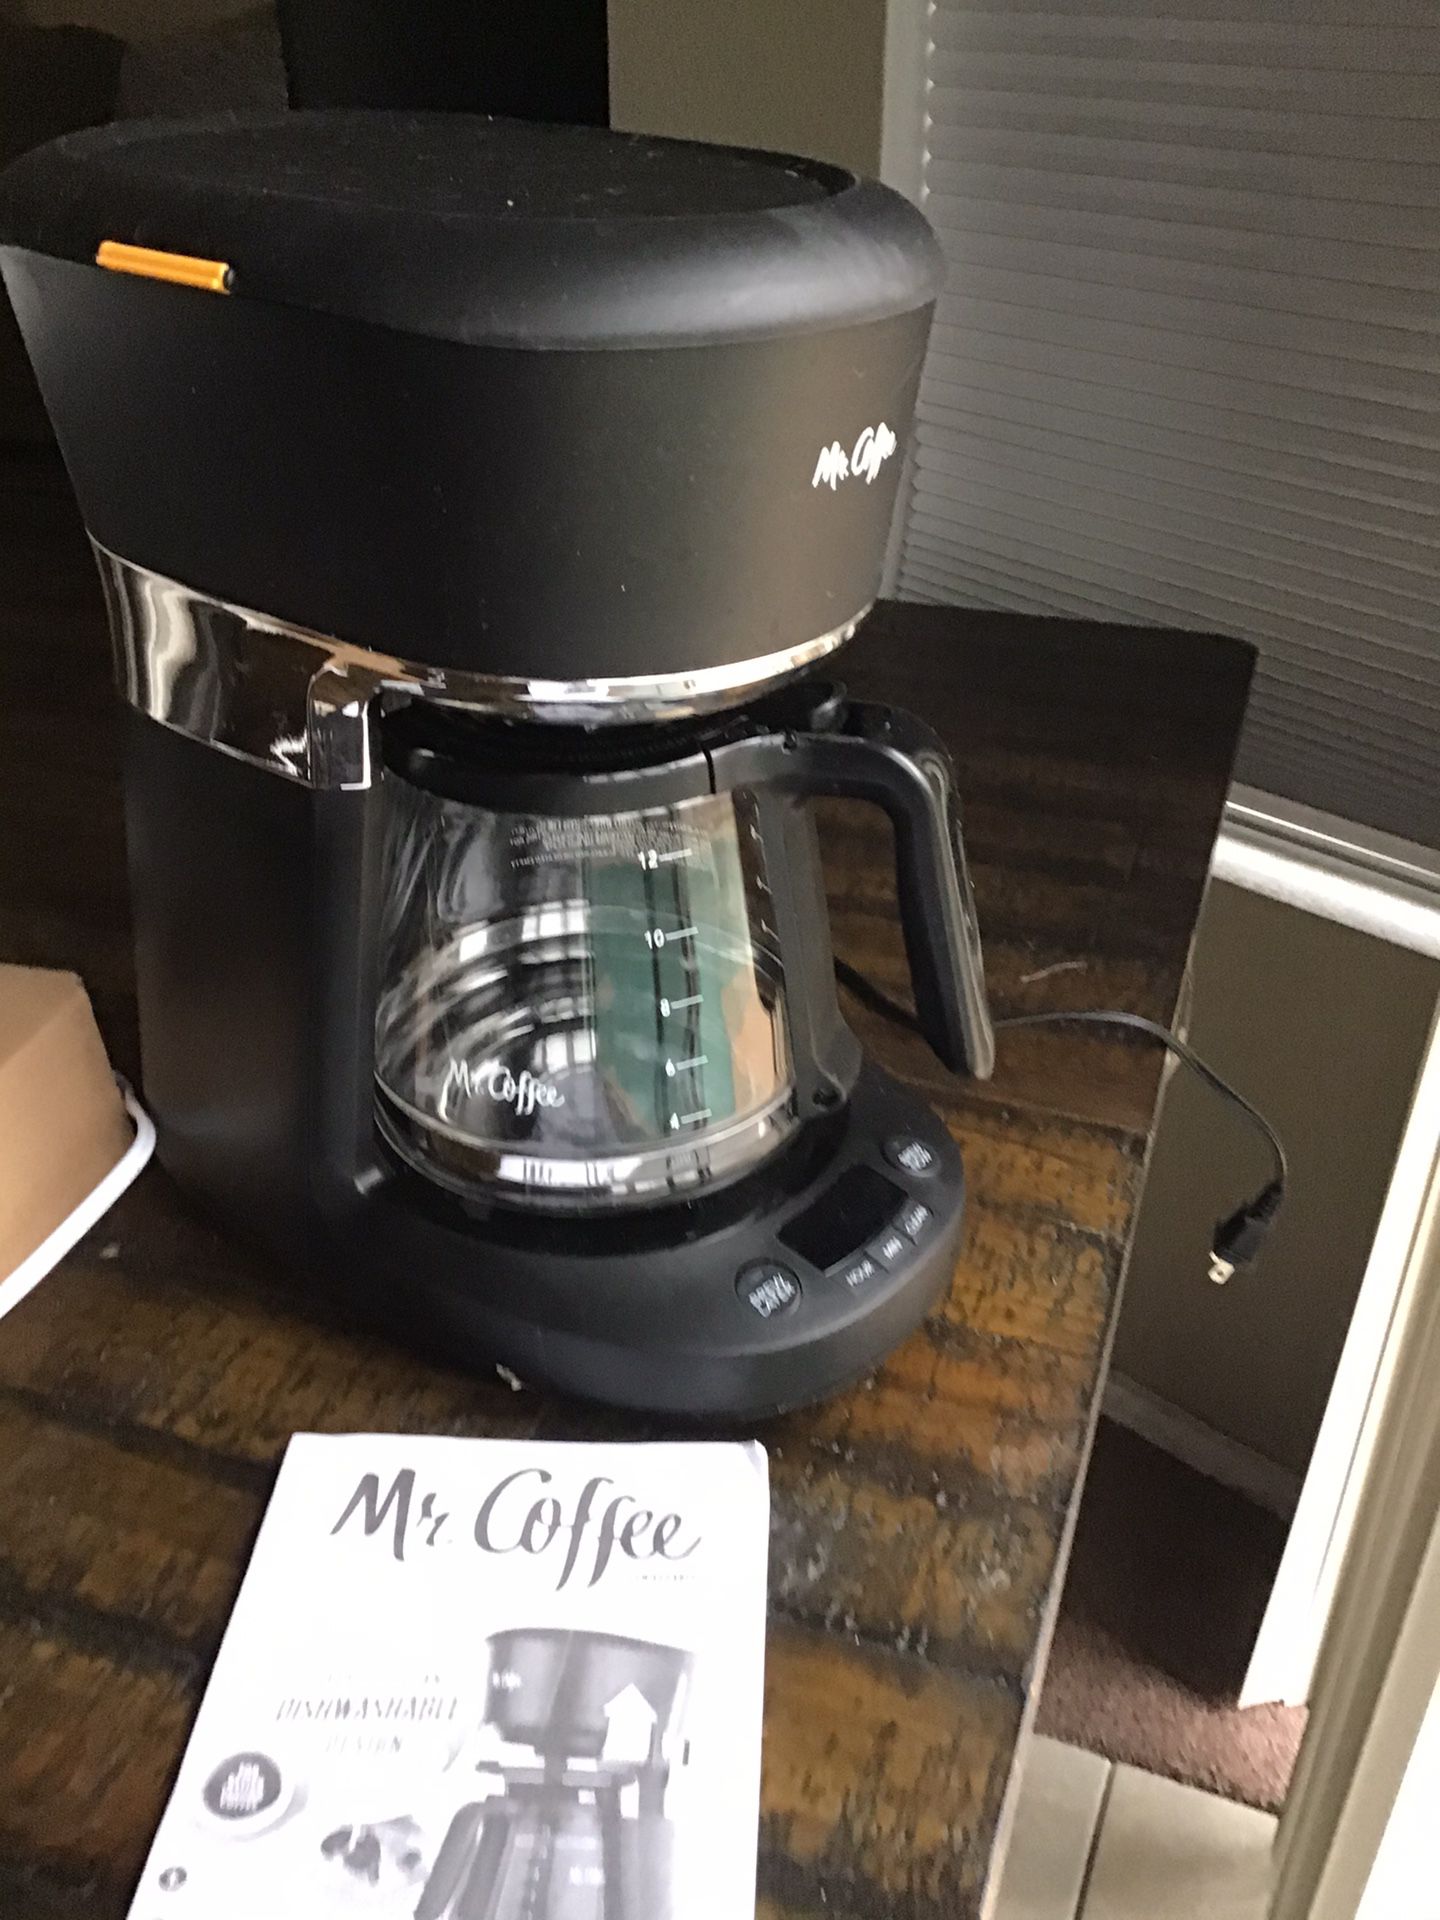 Mr coffee 12 cup coffee maker in excellent condition open box never used in original